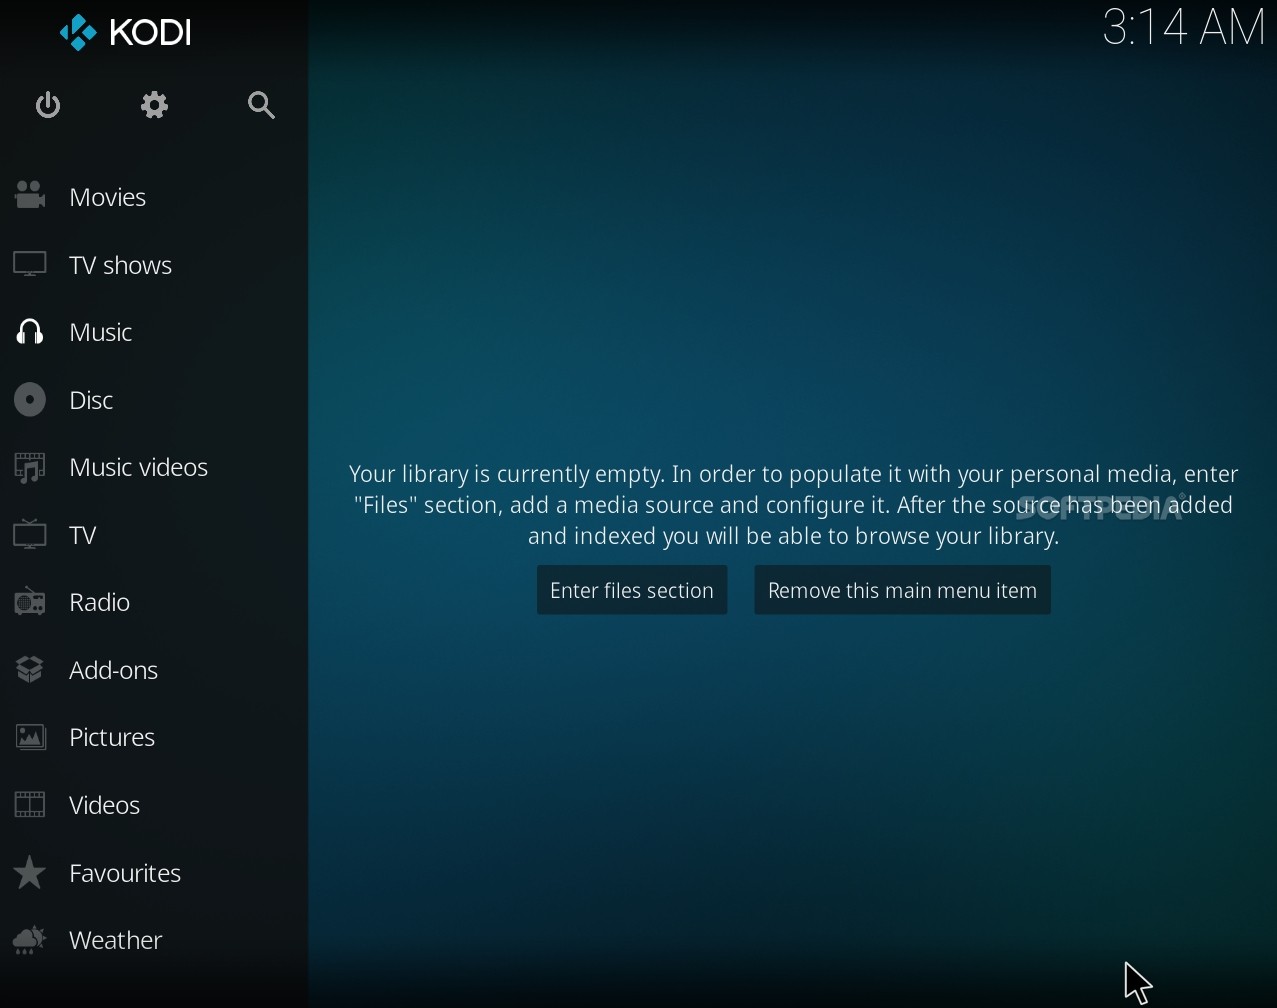 XBMC Media Center screenshot 1 - XBMC Media Center will provide users with an easy-to-use multimedia control panel"